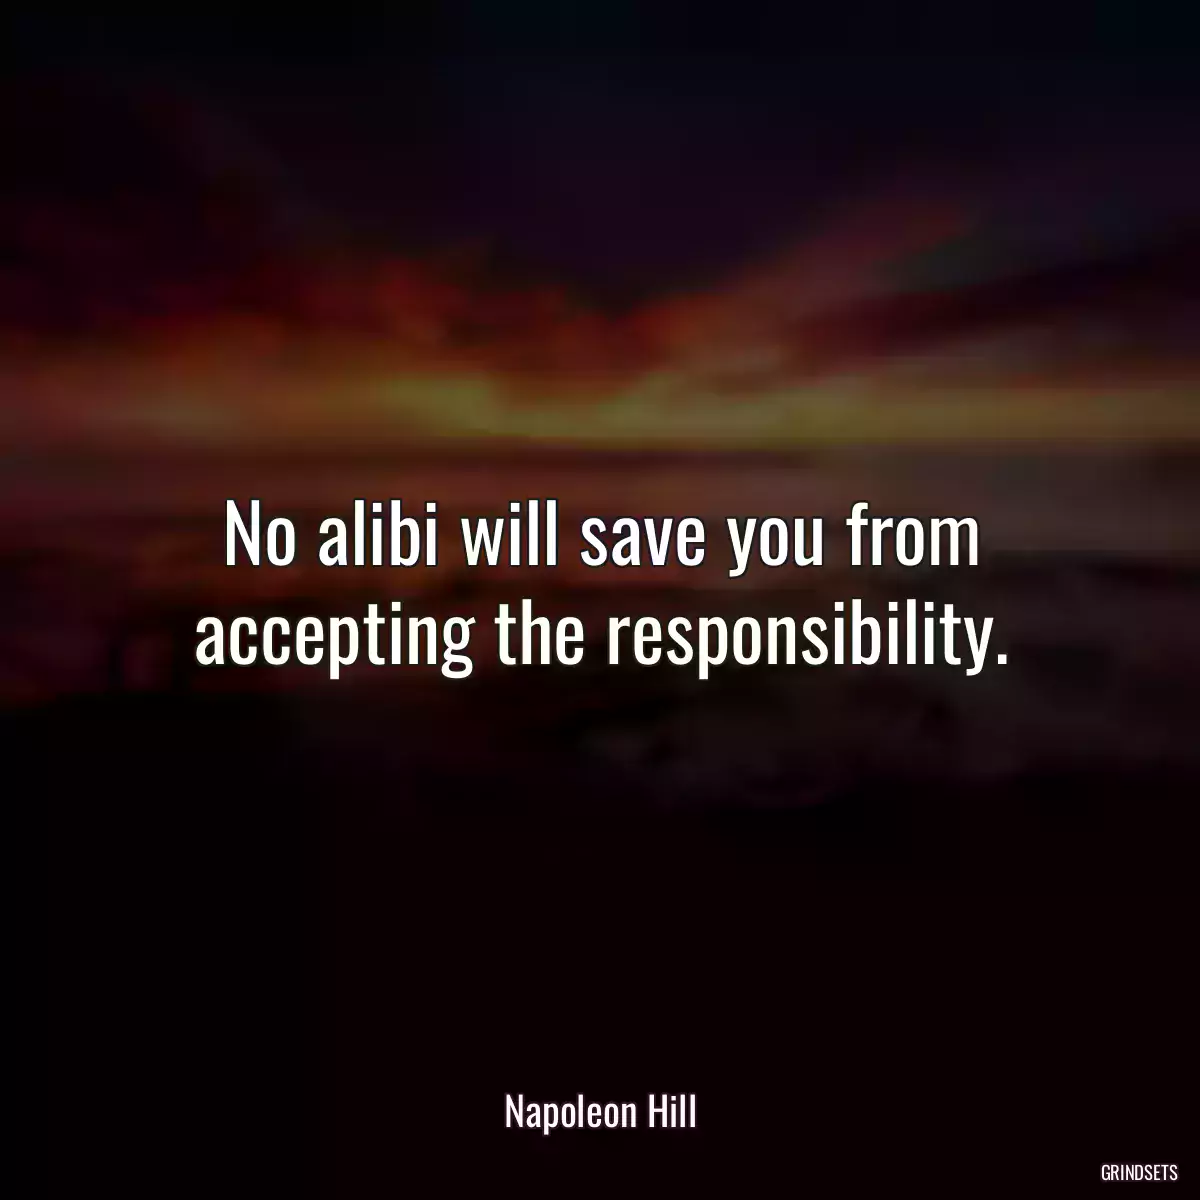 No alibi will save you from accepting the responsibility.